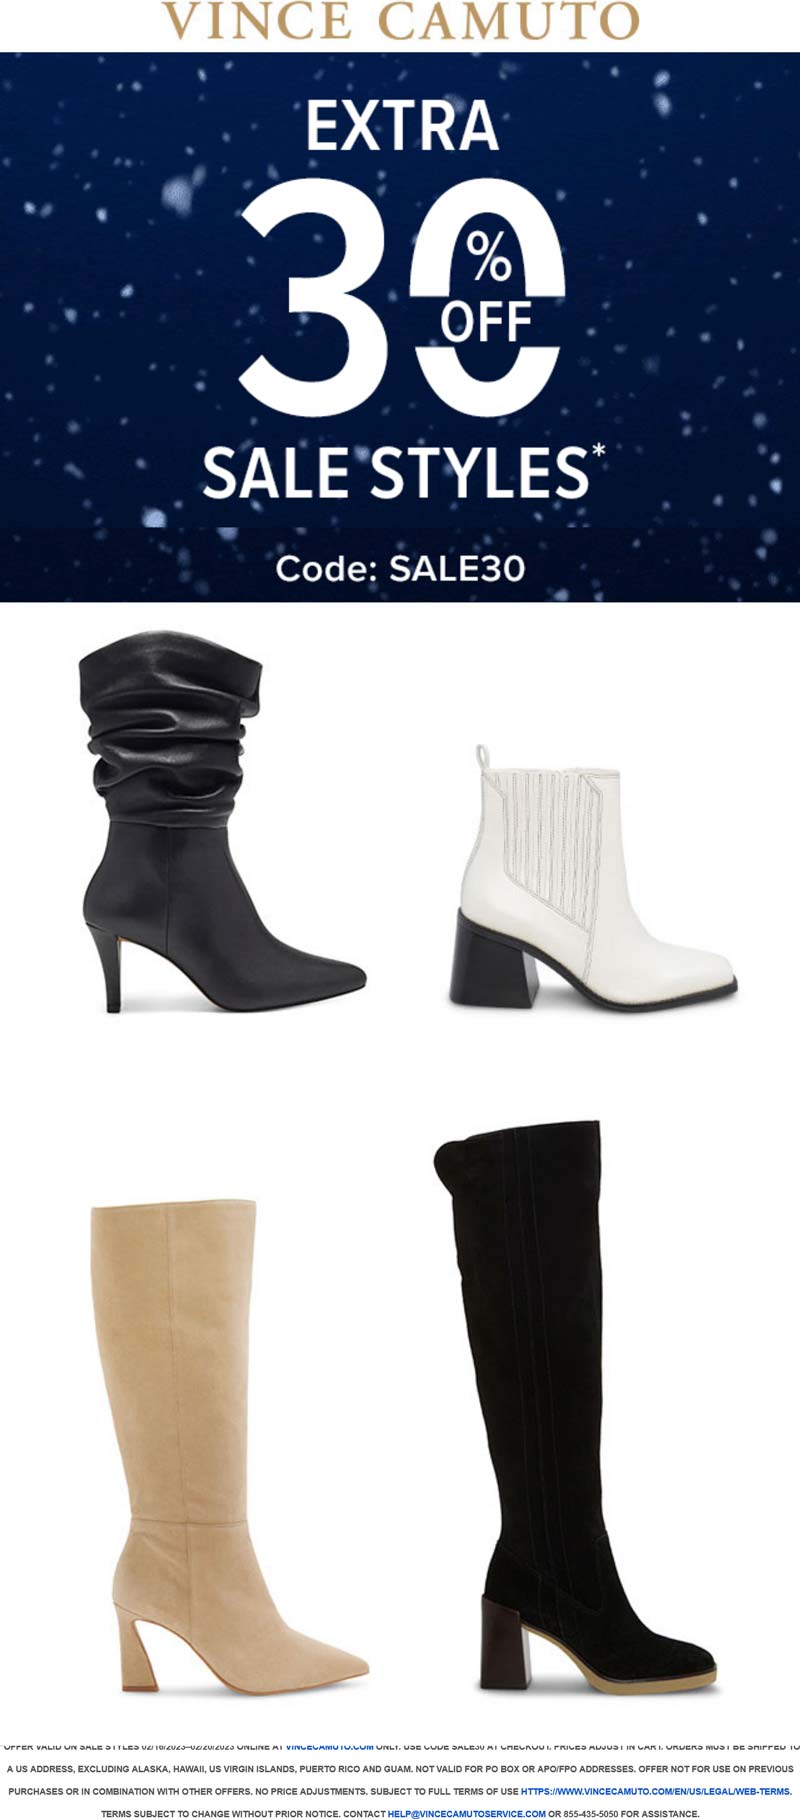 Vince Camuto stores Coupon  Extra 30% off sale styles online at Vince Camuto via promo code SALE30 #vincecamuto 